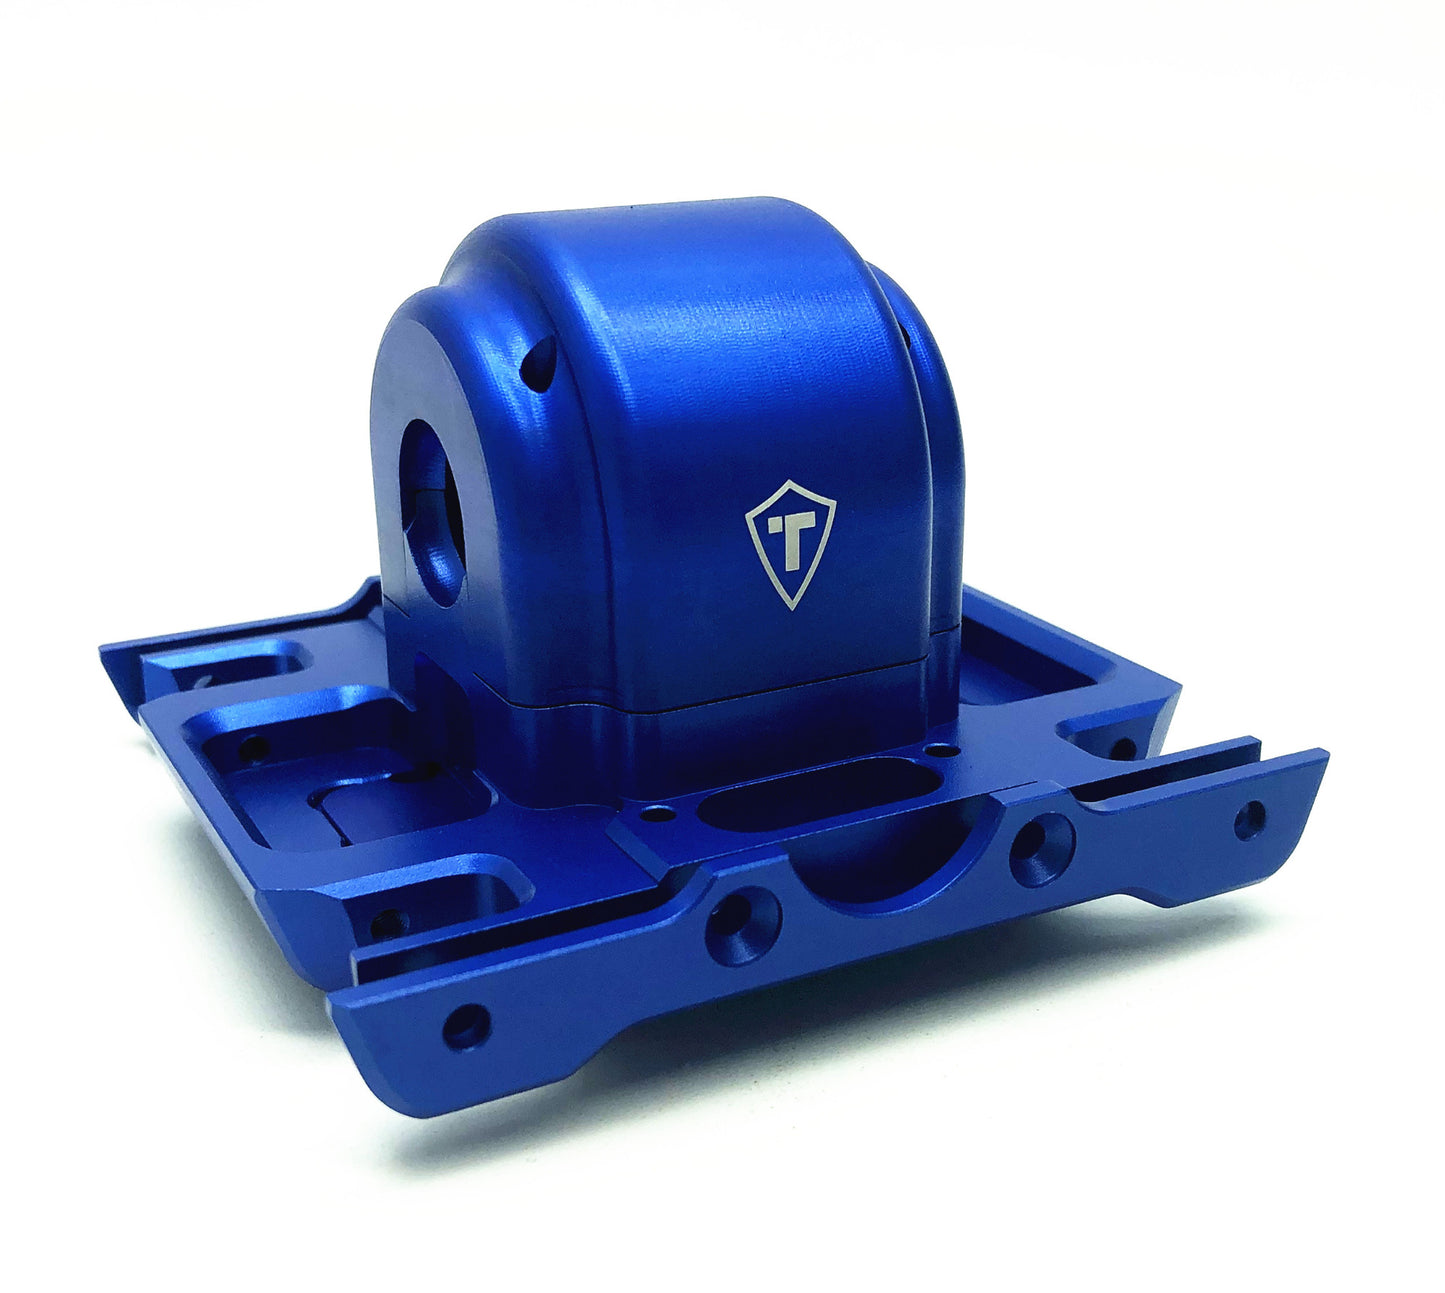 Treal Aluminum 7075 Centre Diffential Housing Gearbox Housing Set with Covers for Losi LMT